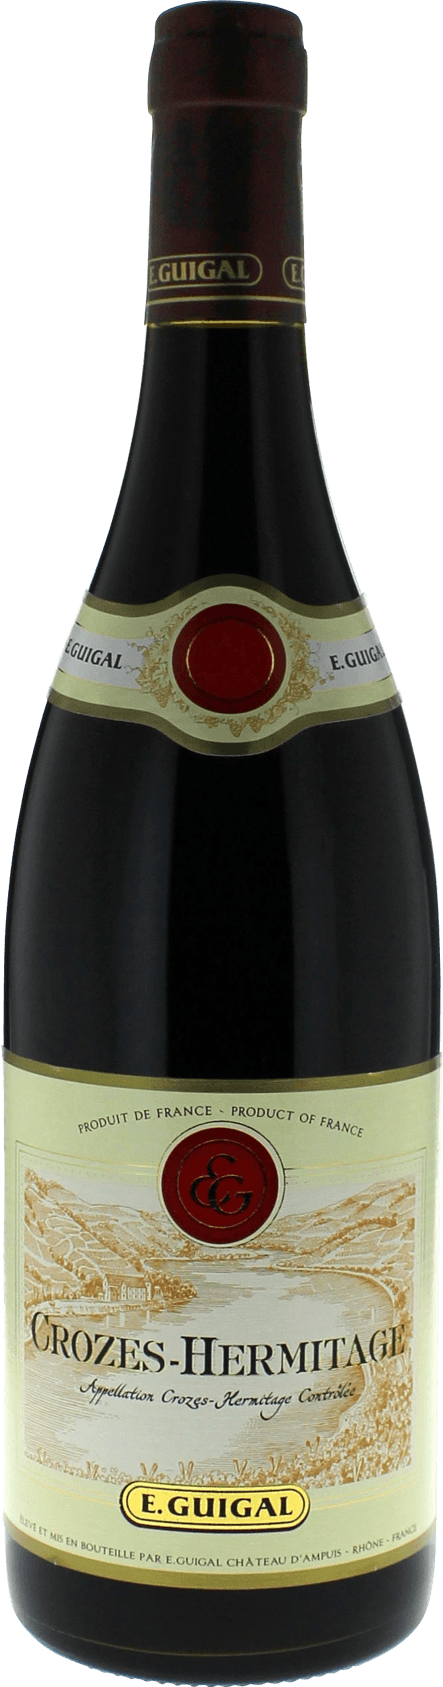 Crozes hermitage rouge e. guigal 2014  Crozes Hermitage, Slection Valle du Rhone rouge